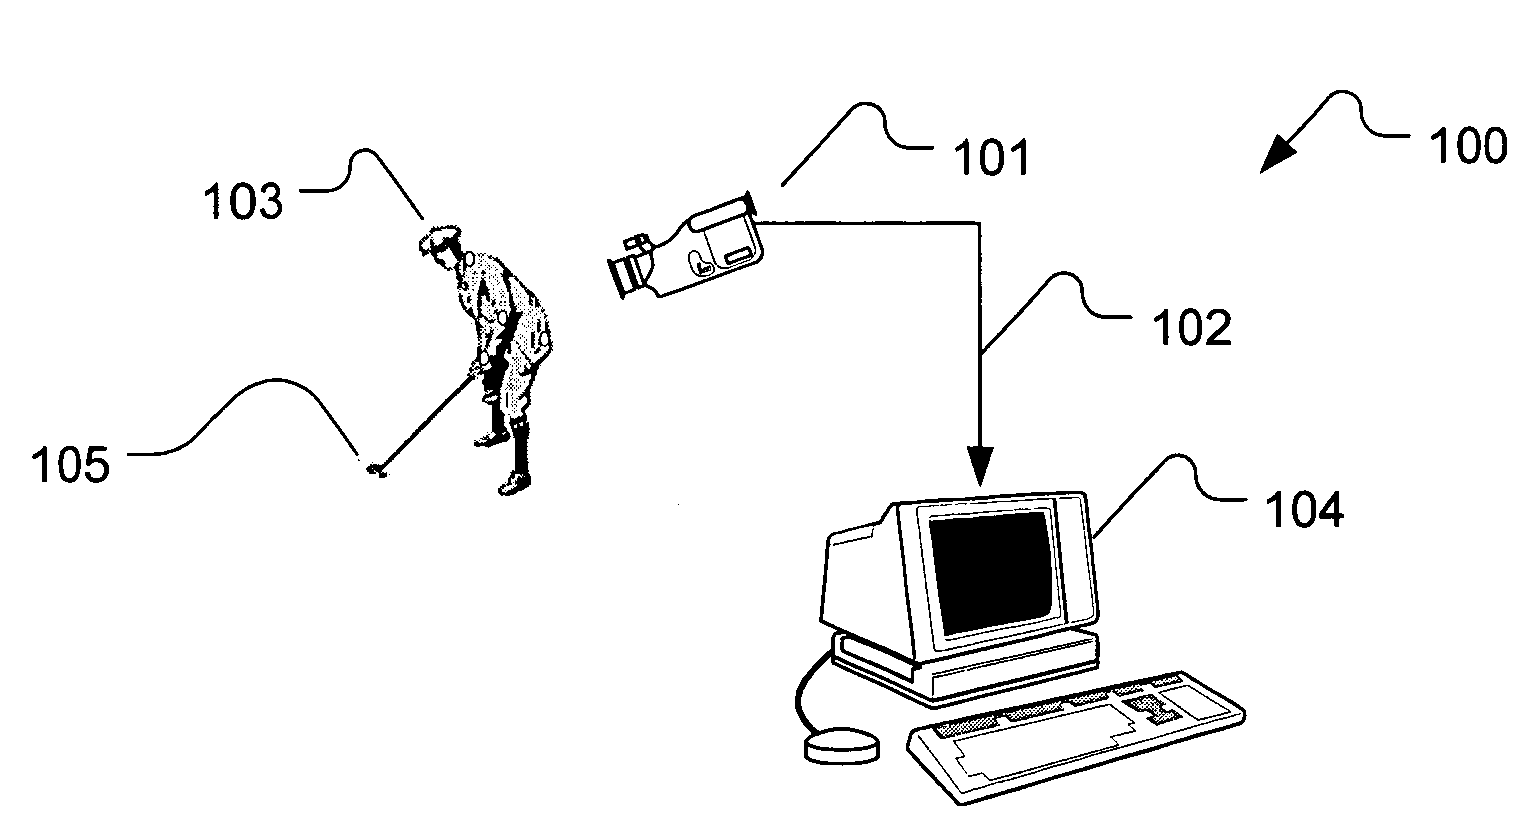 Method and system for physical motion analysis and training of a golf club swing motion using image analysis techniques